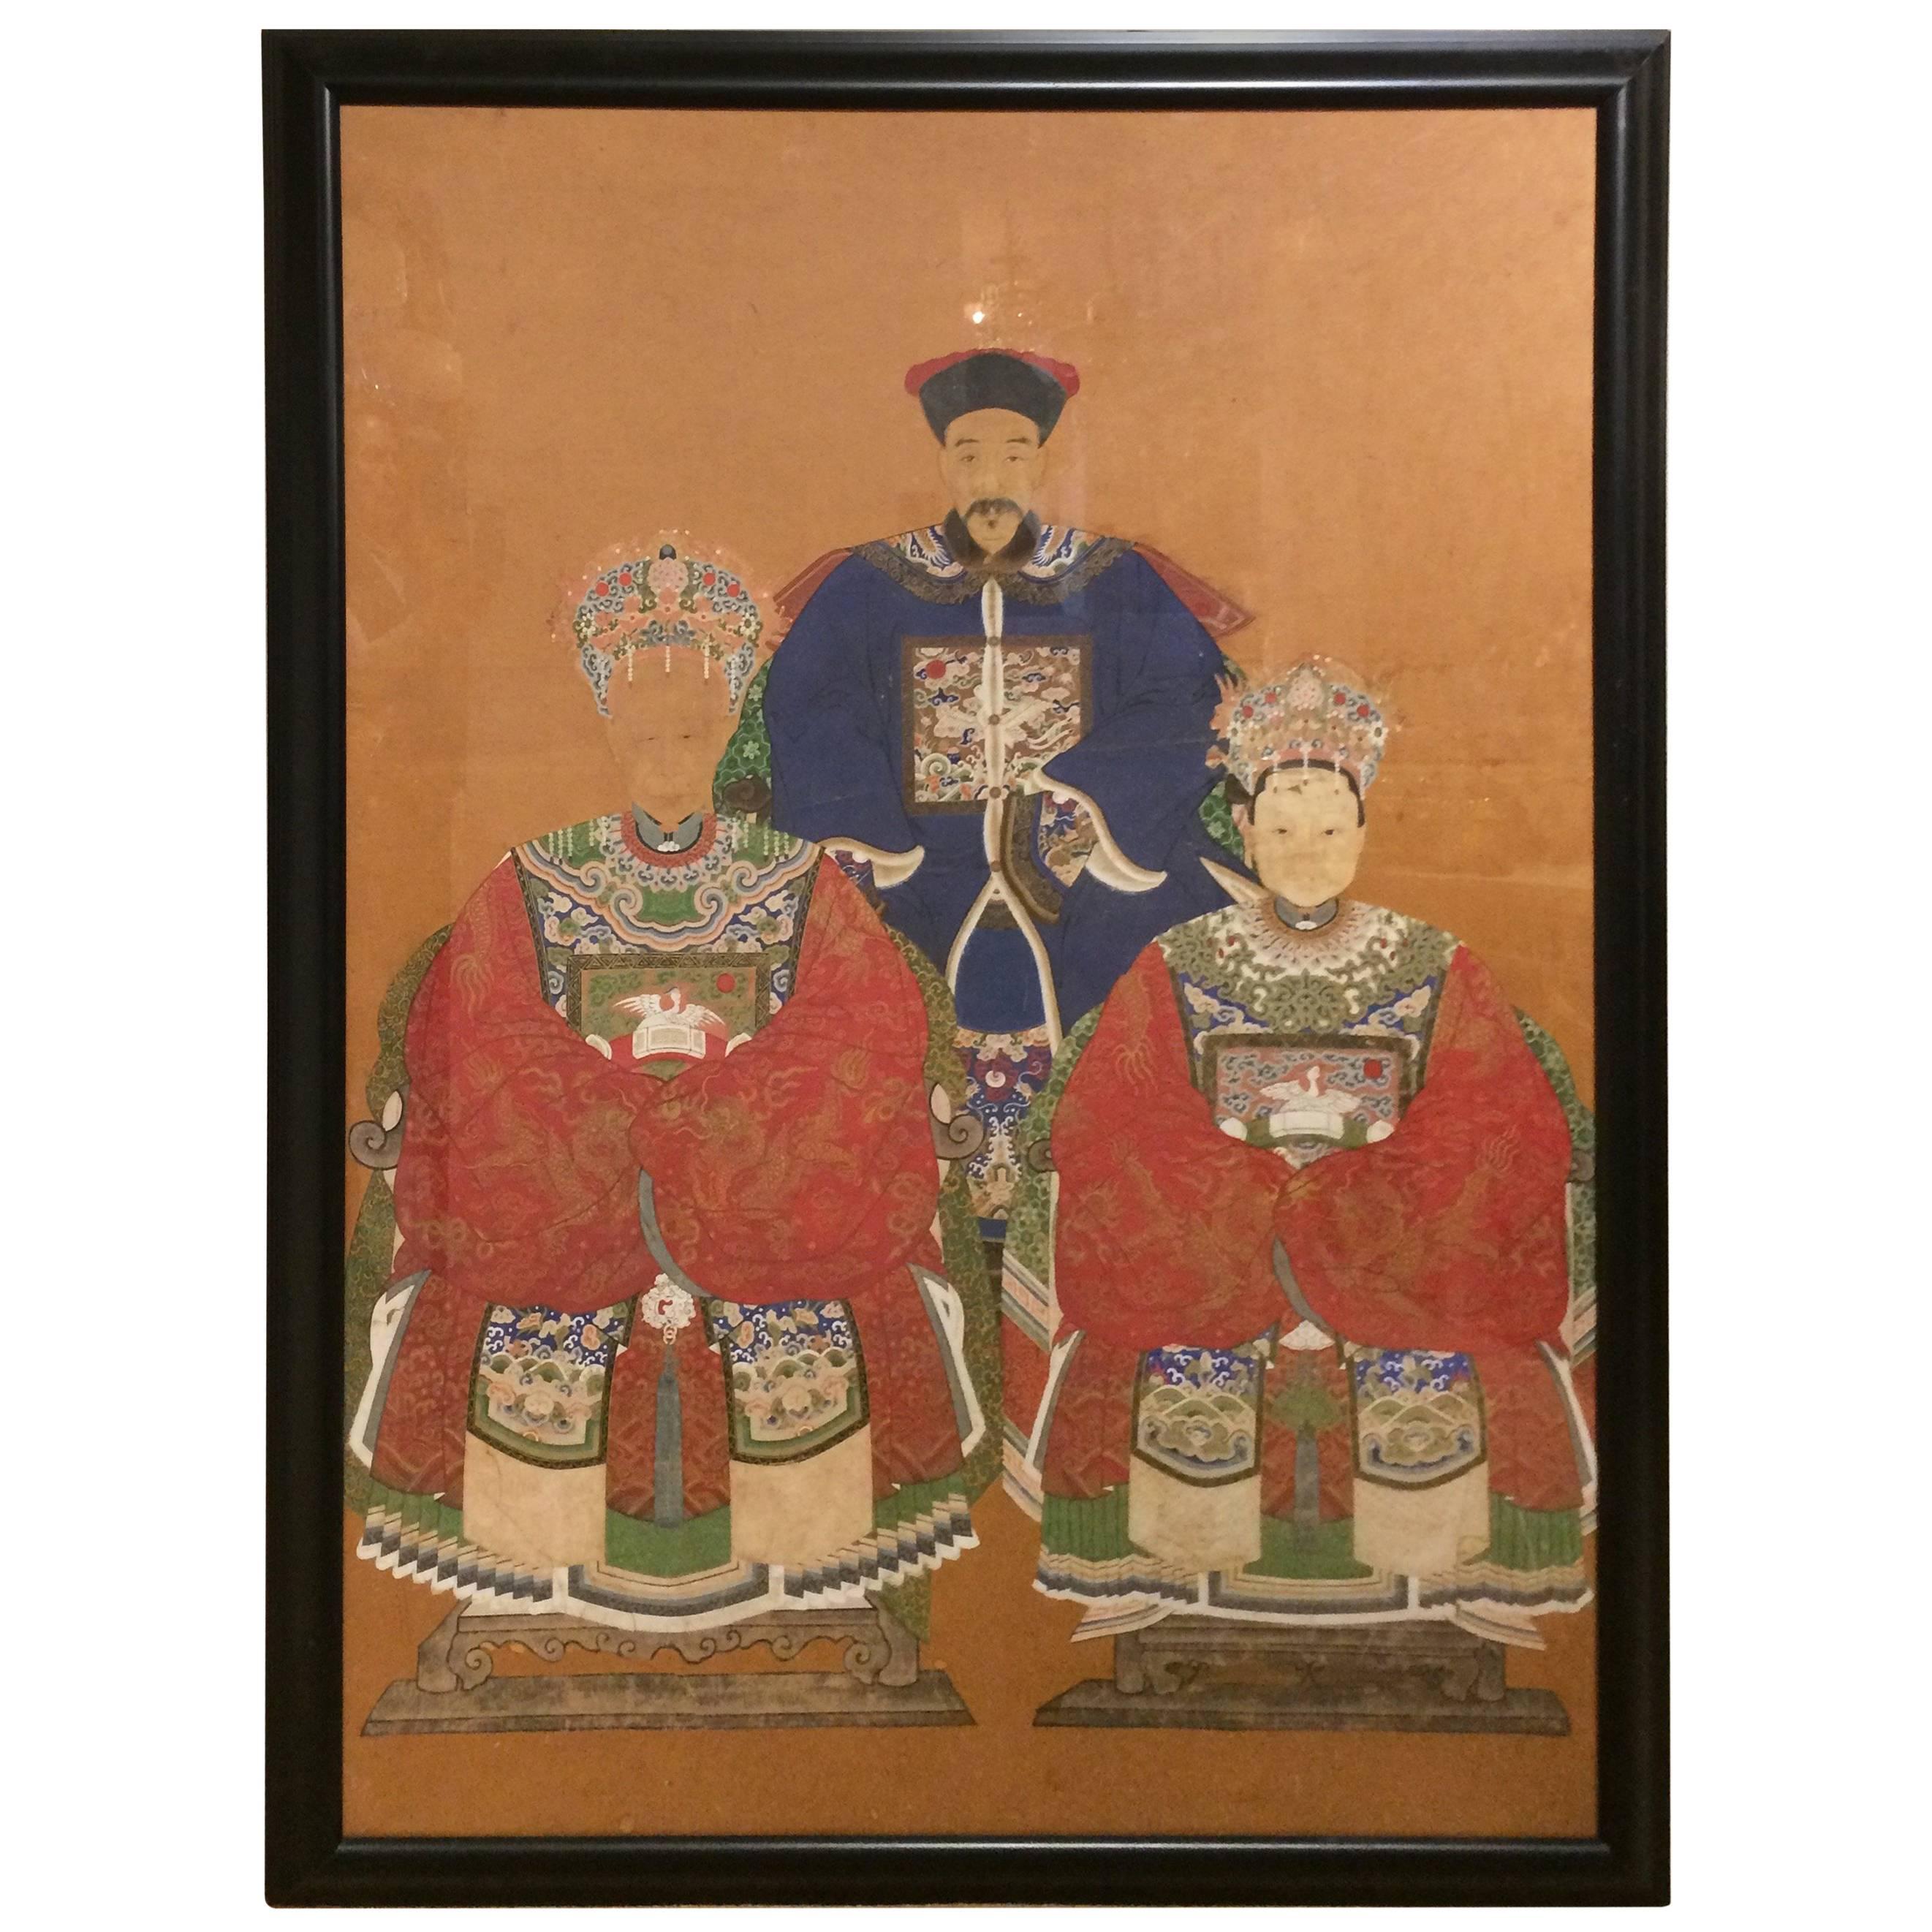 Superb Very Large Finely Rendered Chinese Antique Ancestral Portrait 